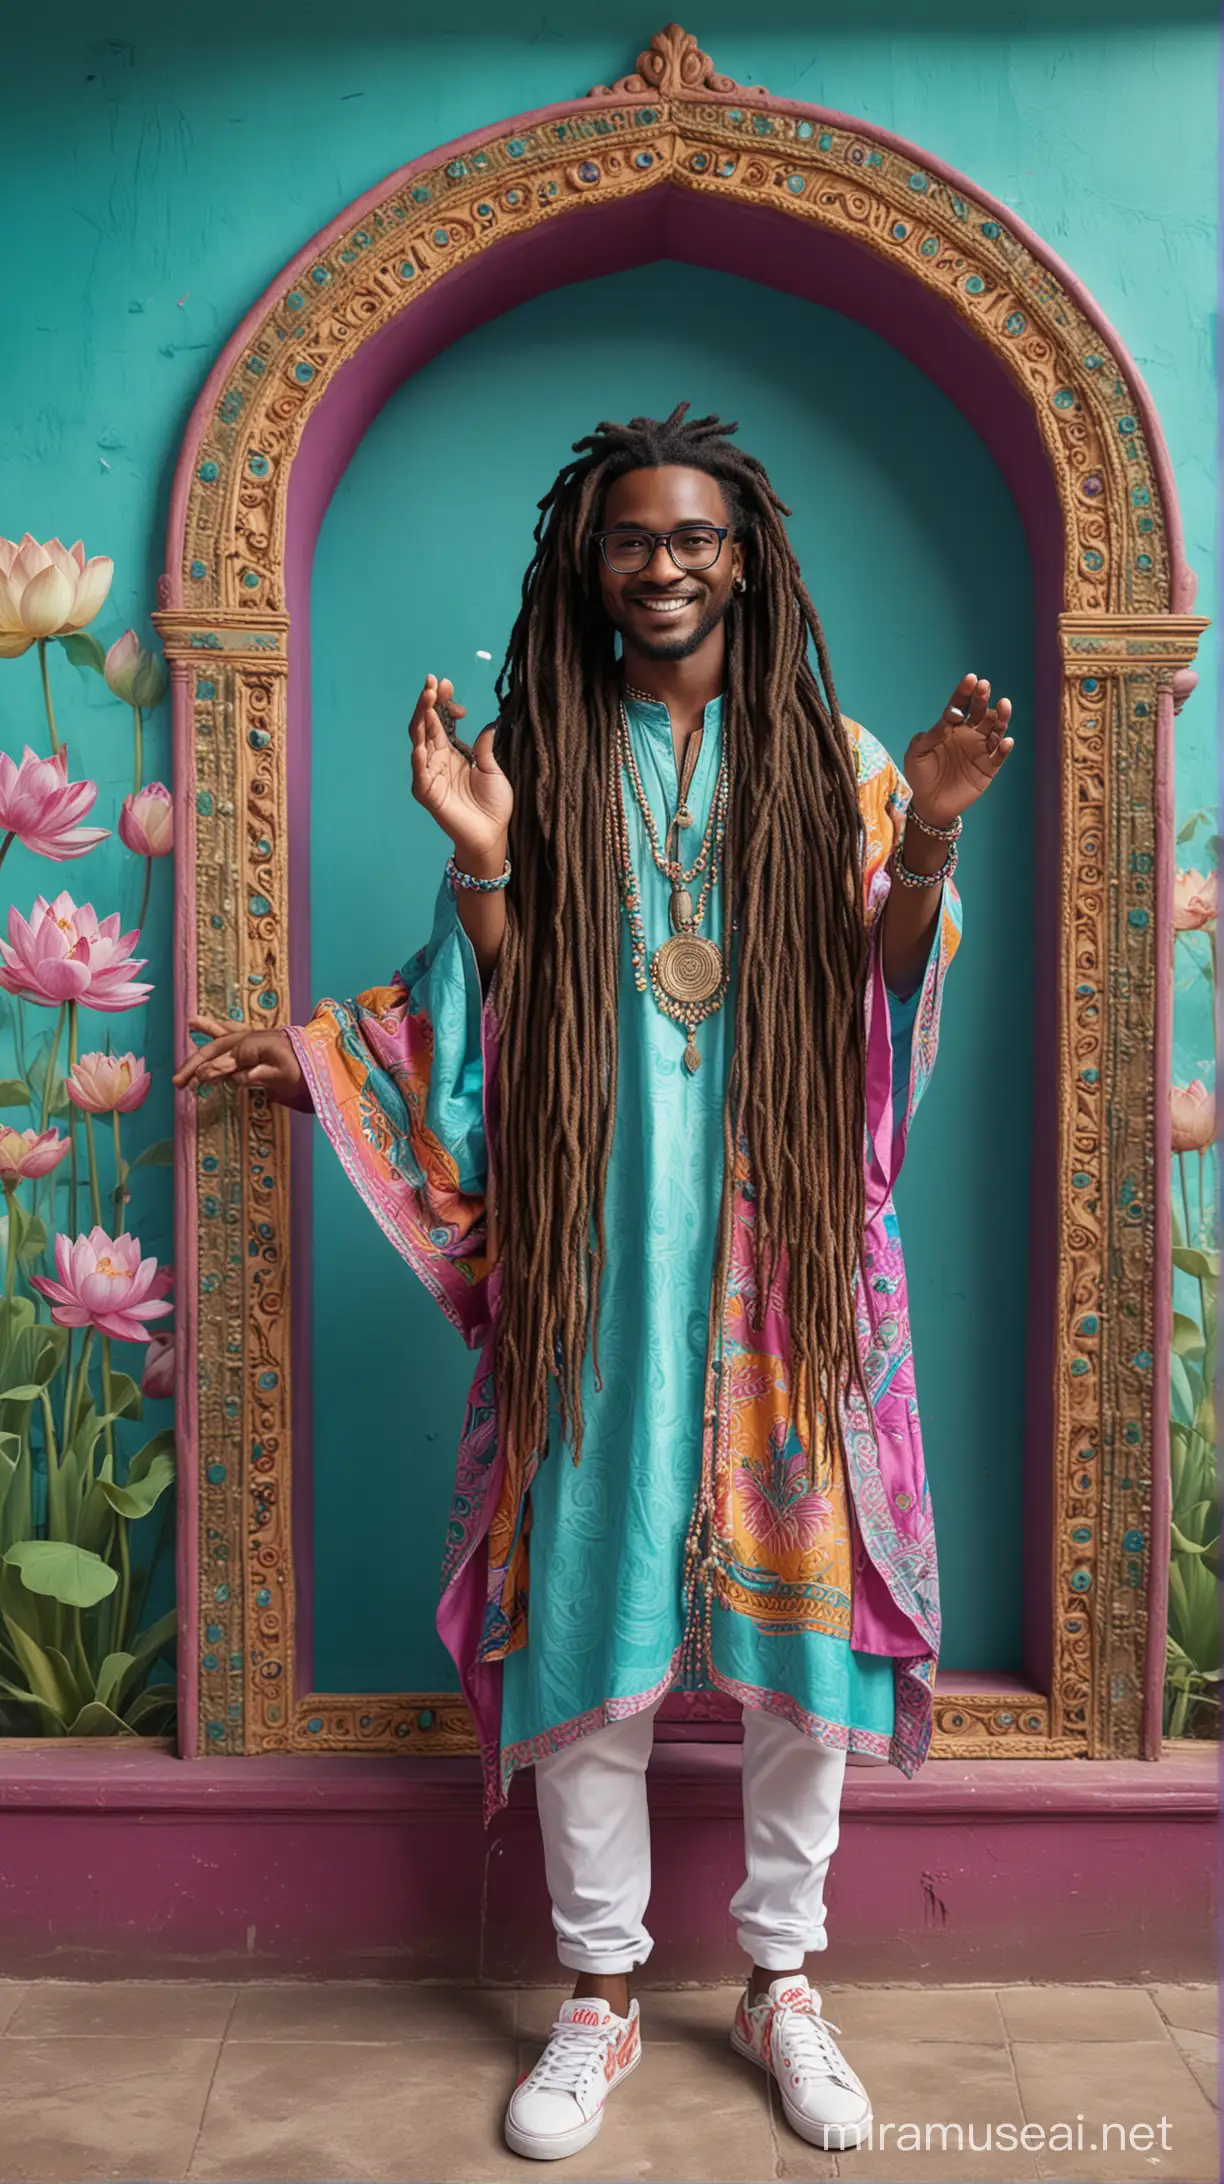 male musician from cameroon playing in
a musical instrumen, showing off in bent dynamic position, slim and extra tall, long dreadlocks, realistic, smiling inside, open hair style, modern large and thick design turquoise and magenta frame glasses, fingers are in realistic position, position of the hands are hyperrealistic, standing leaning on the wall, necklace and wristbands beads, colorfully abundant, western designer dresses with lotus and african pattern, several layers, all colours, turquoise, purple, green, white, yellow, hip hop style, benares court and river ghats, mughal scenario and arches, water lilies, colorful, psychedelic, all hyperrealistic, pastel colors on walls wearing off, background blurred